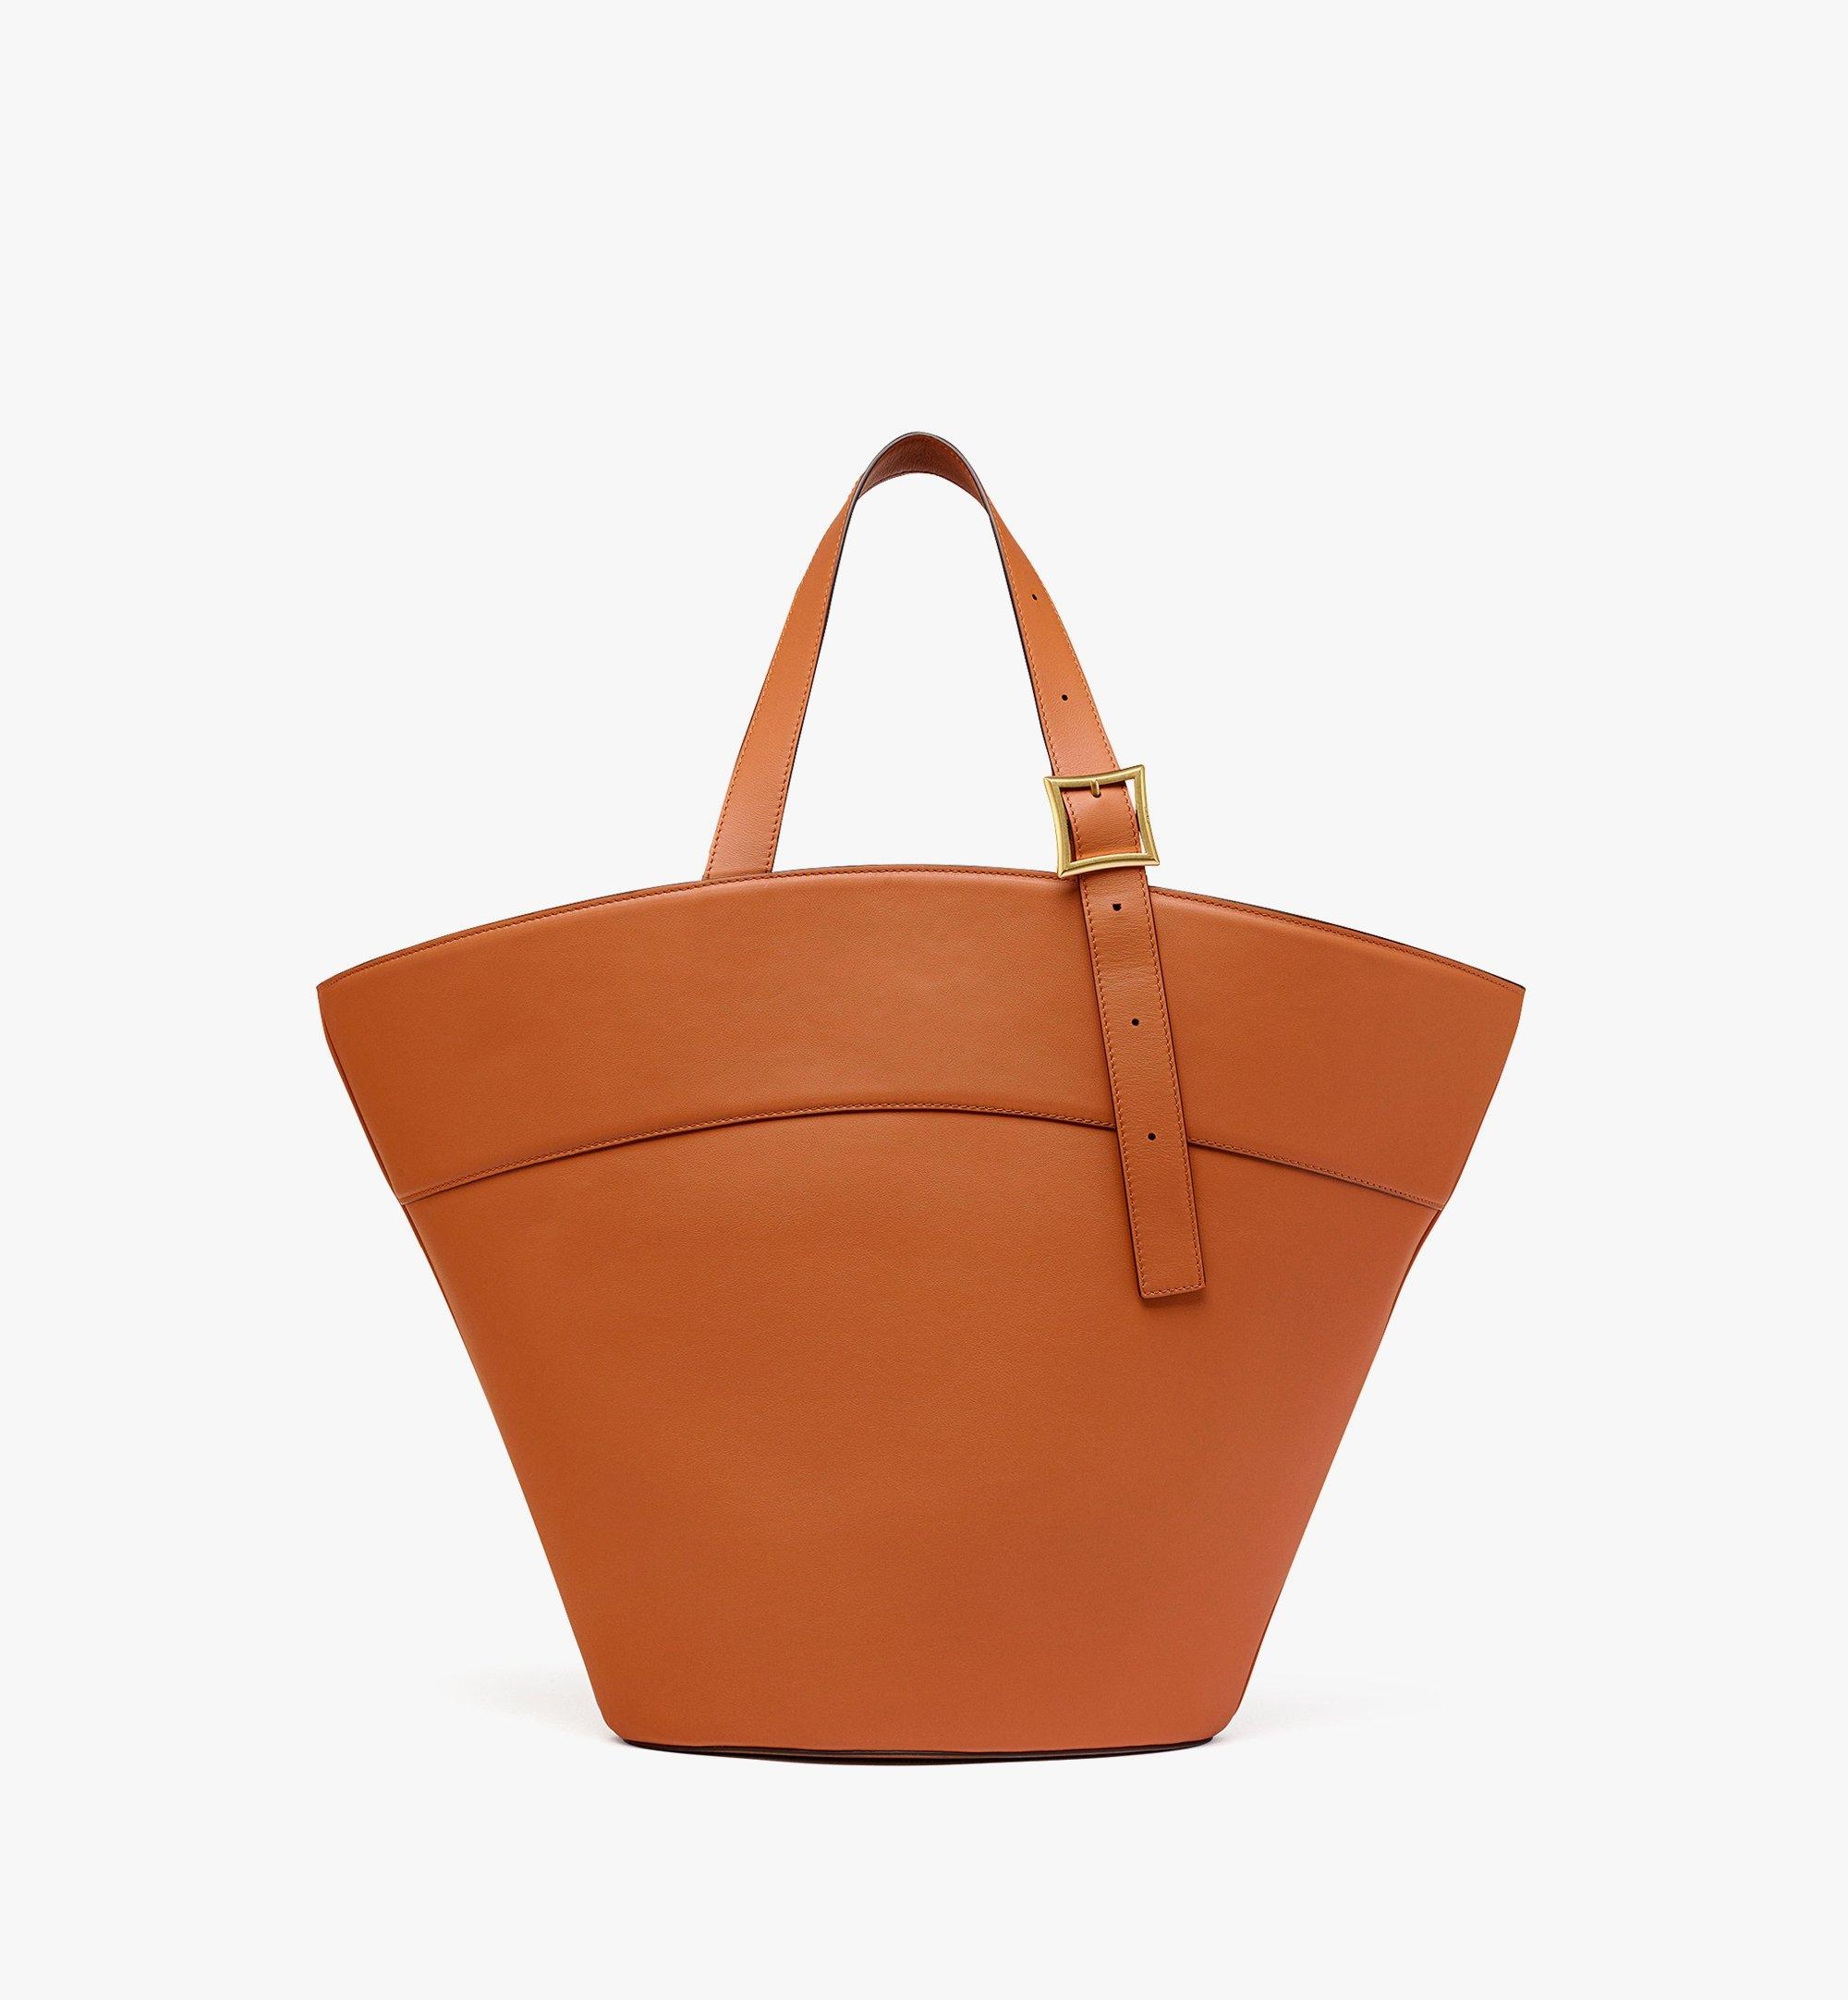 Himmel Tote in Spanish Nappa Leather - 4